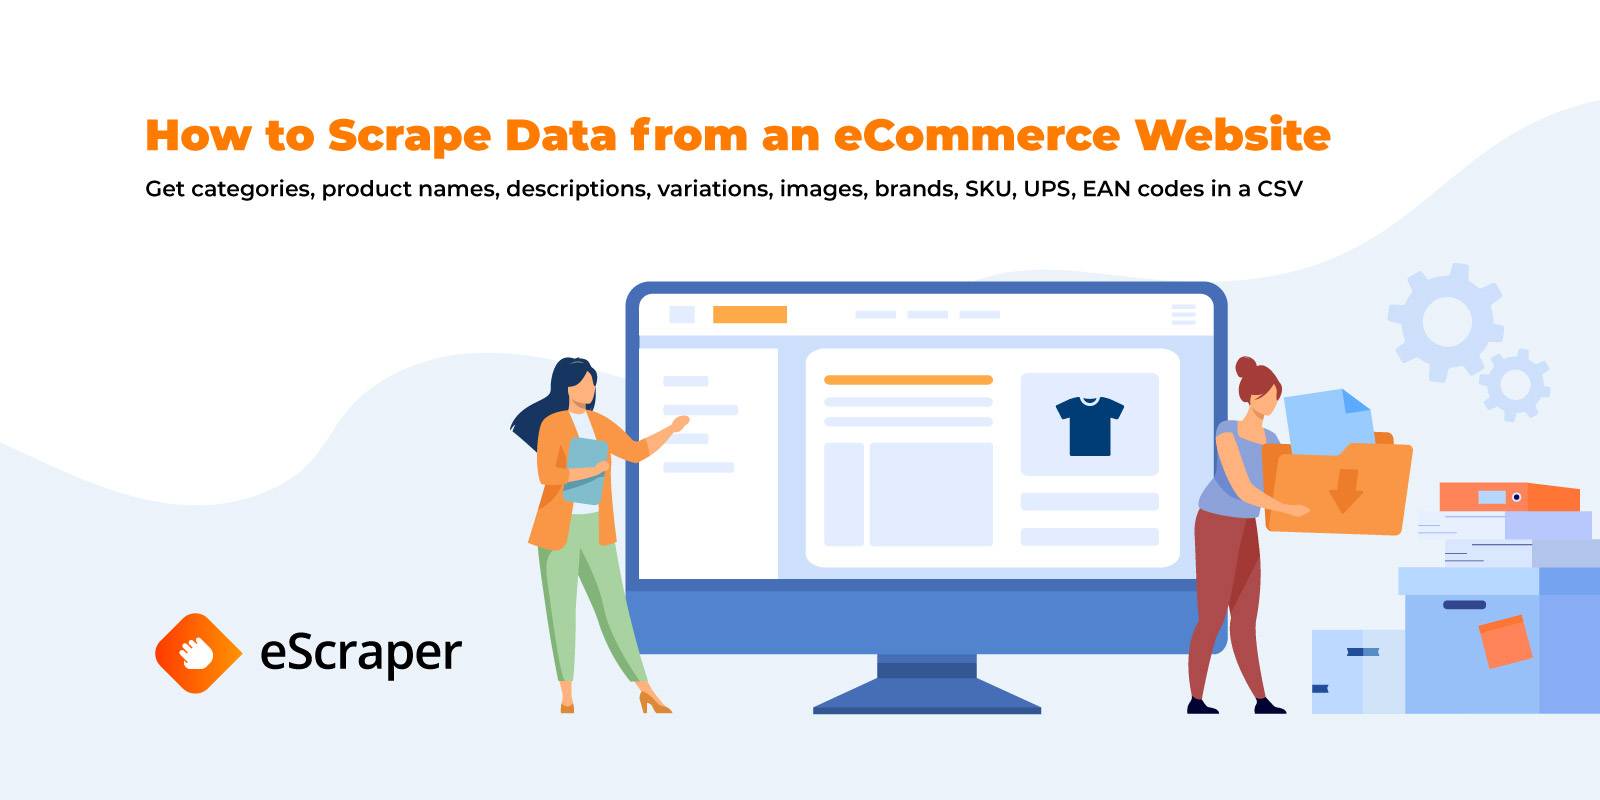 Web scraping eCommerce websites: tips to get usable data